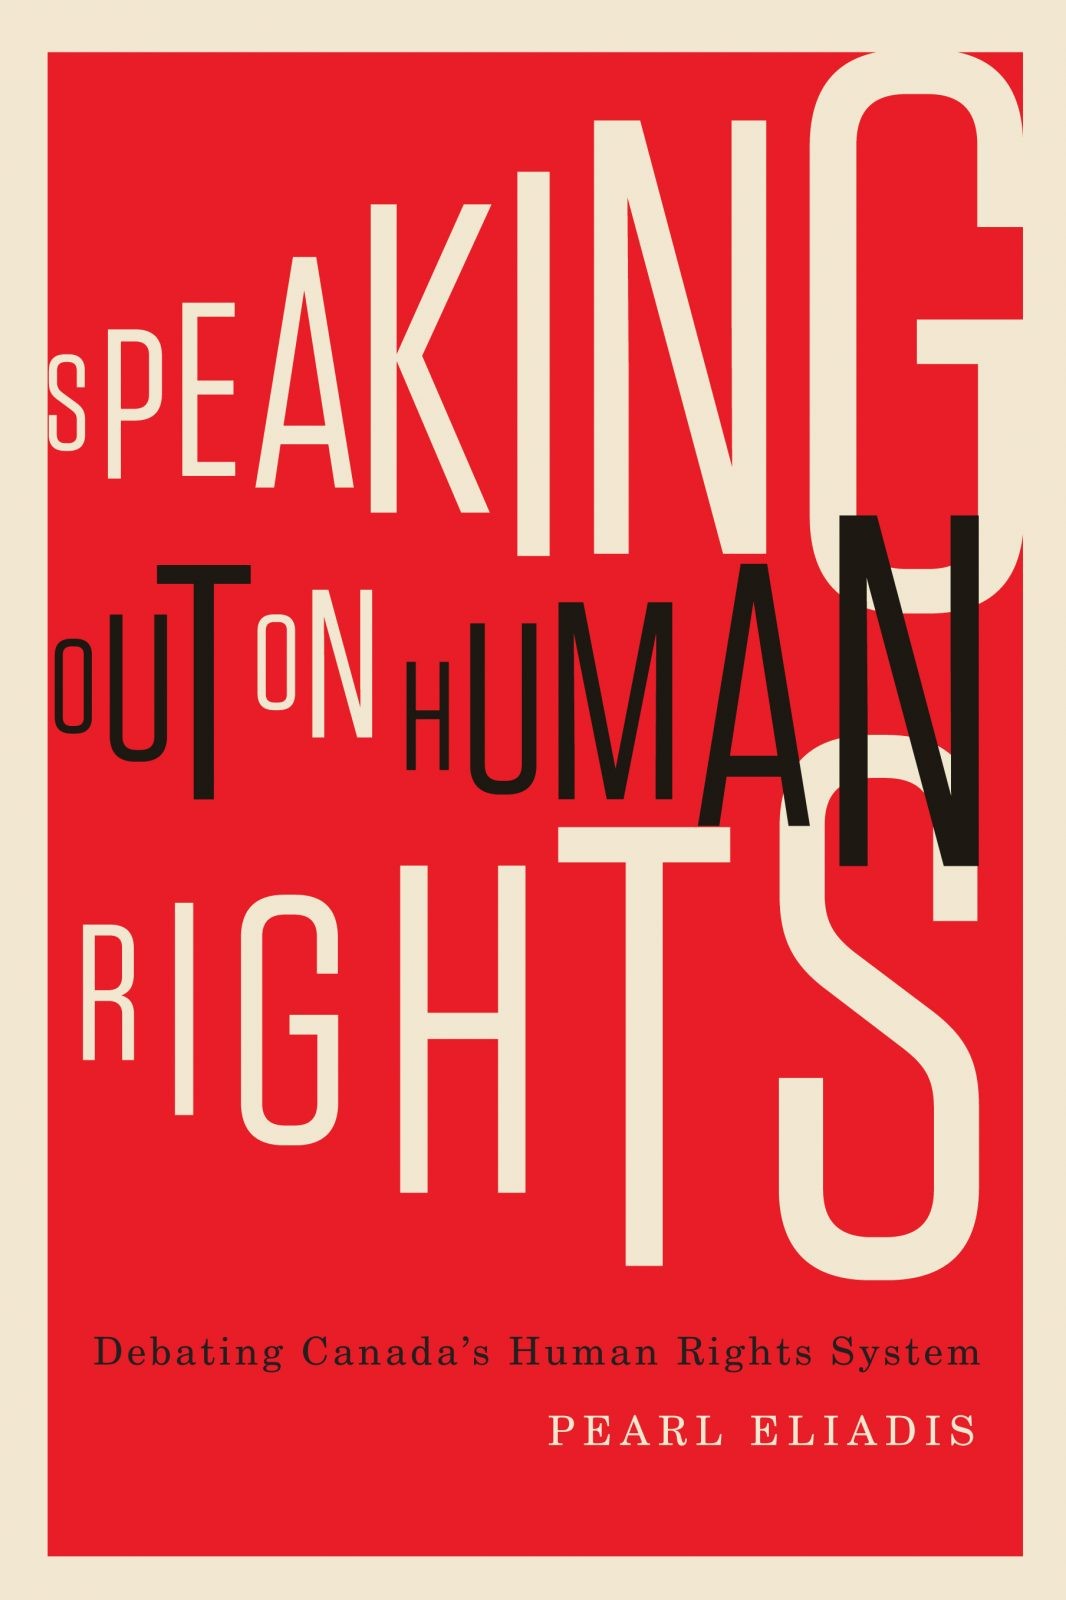 Speaking Out on Human Rights, by Pearl Eliadis